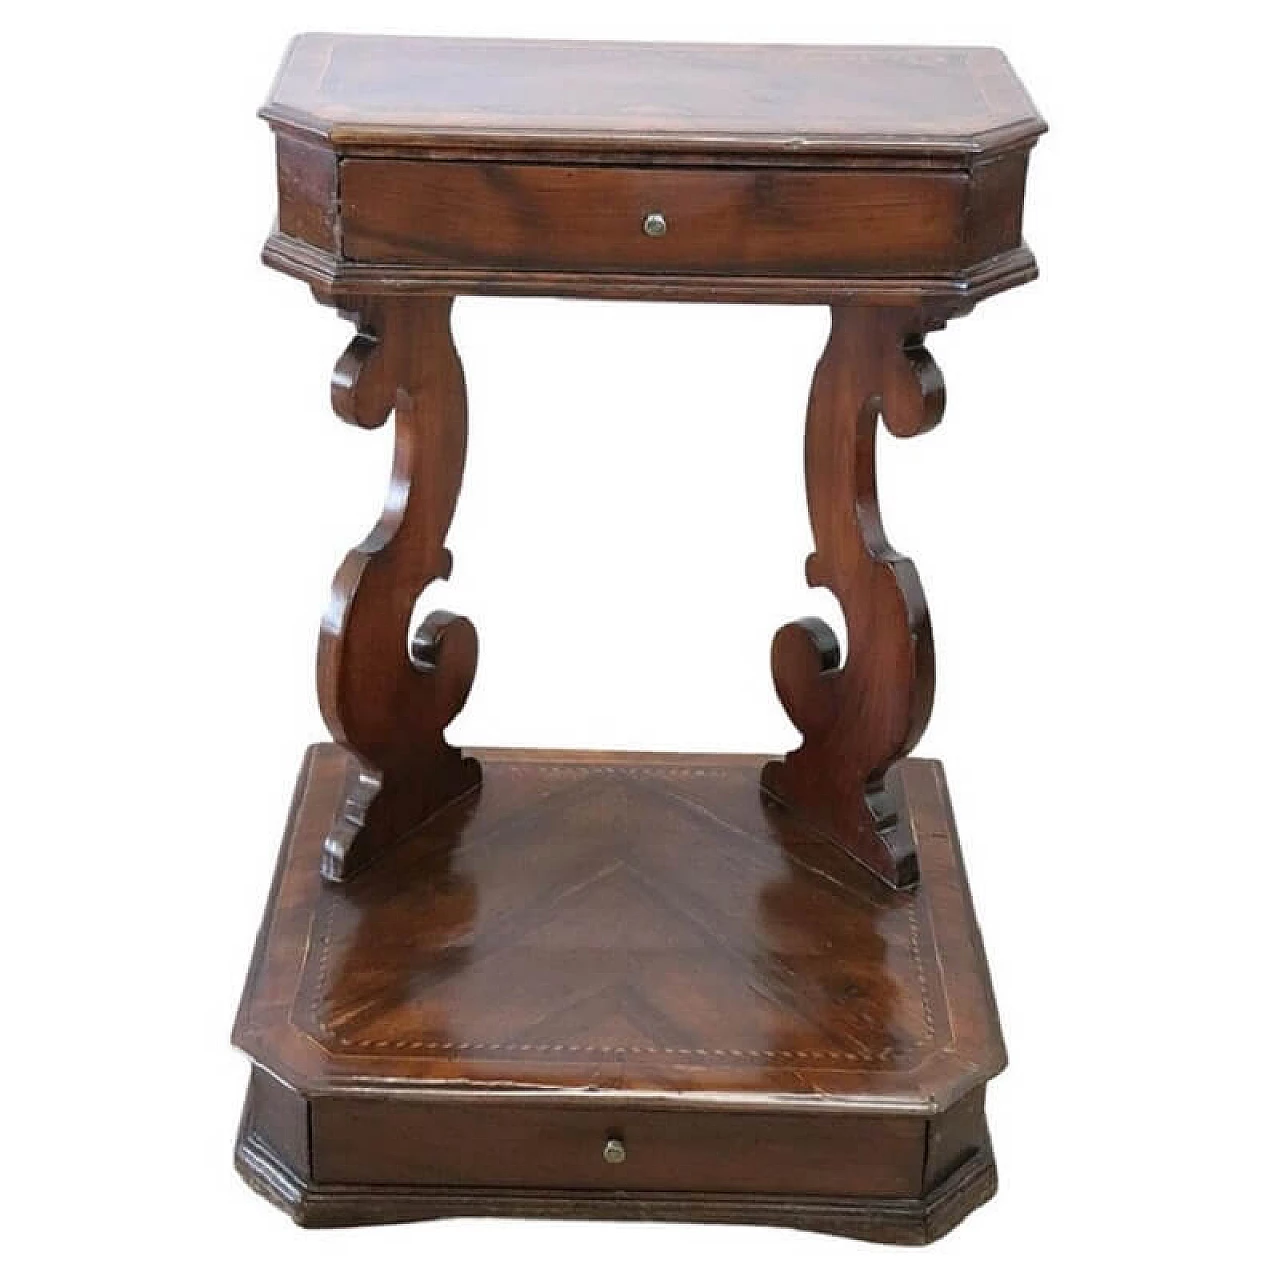 Kneeling-stool in walnut with inlays, late 18th century 1